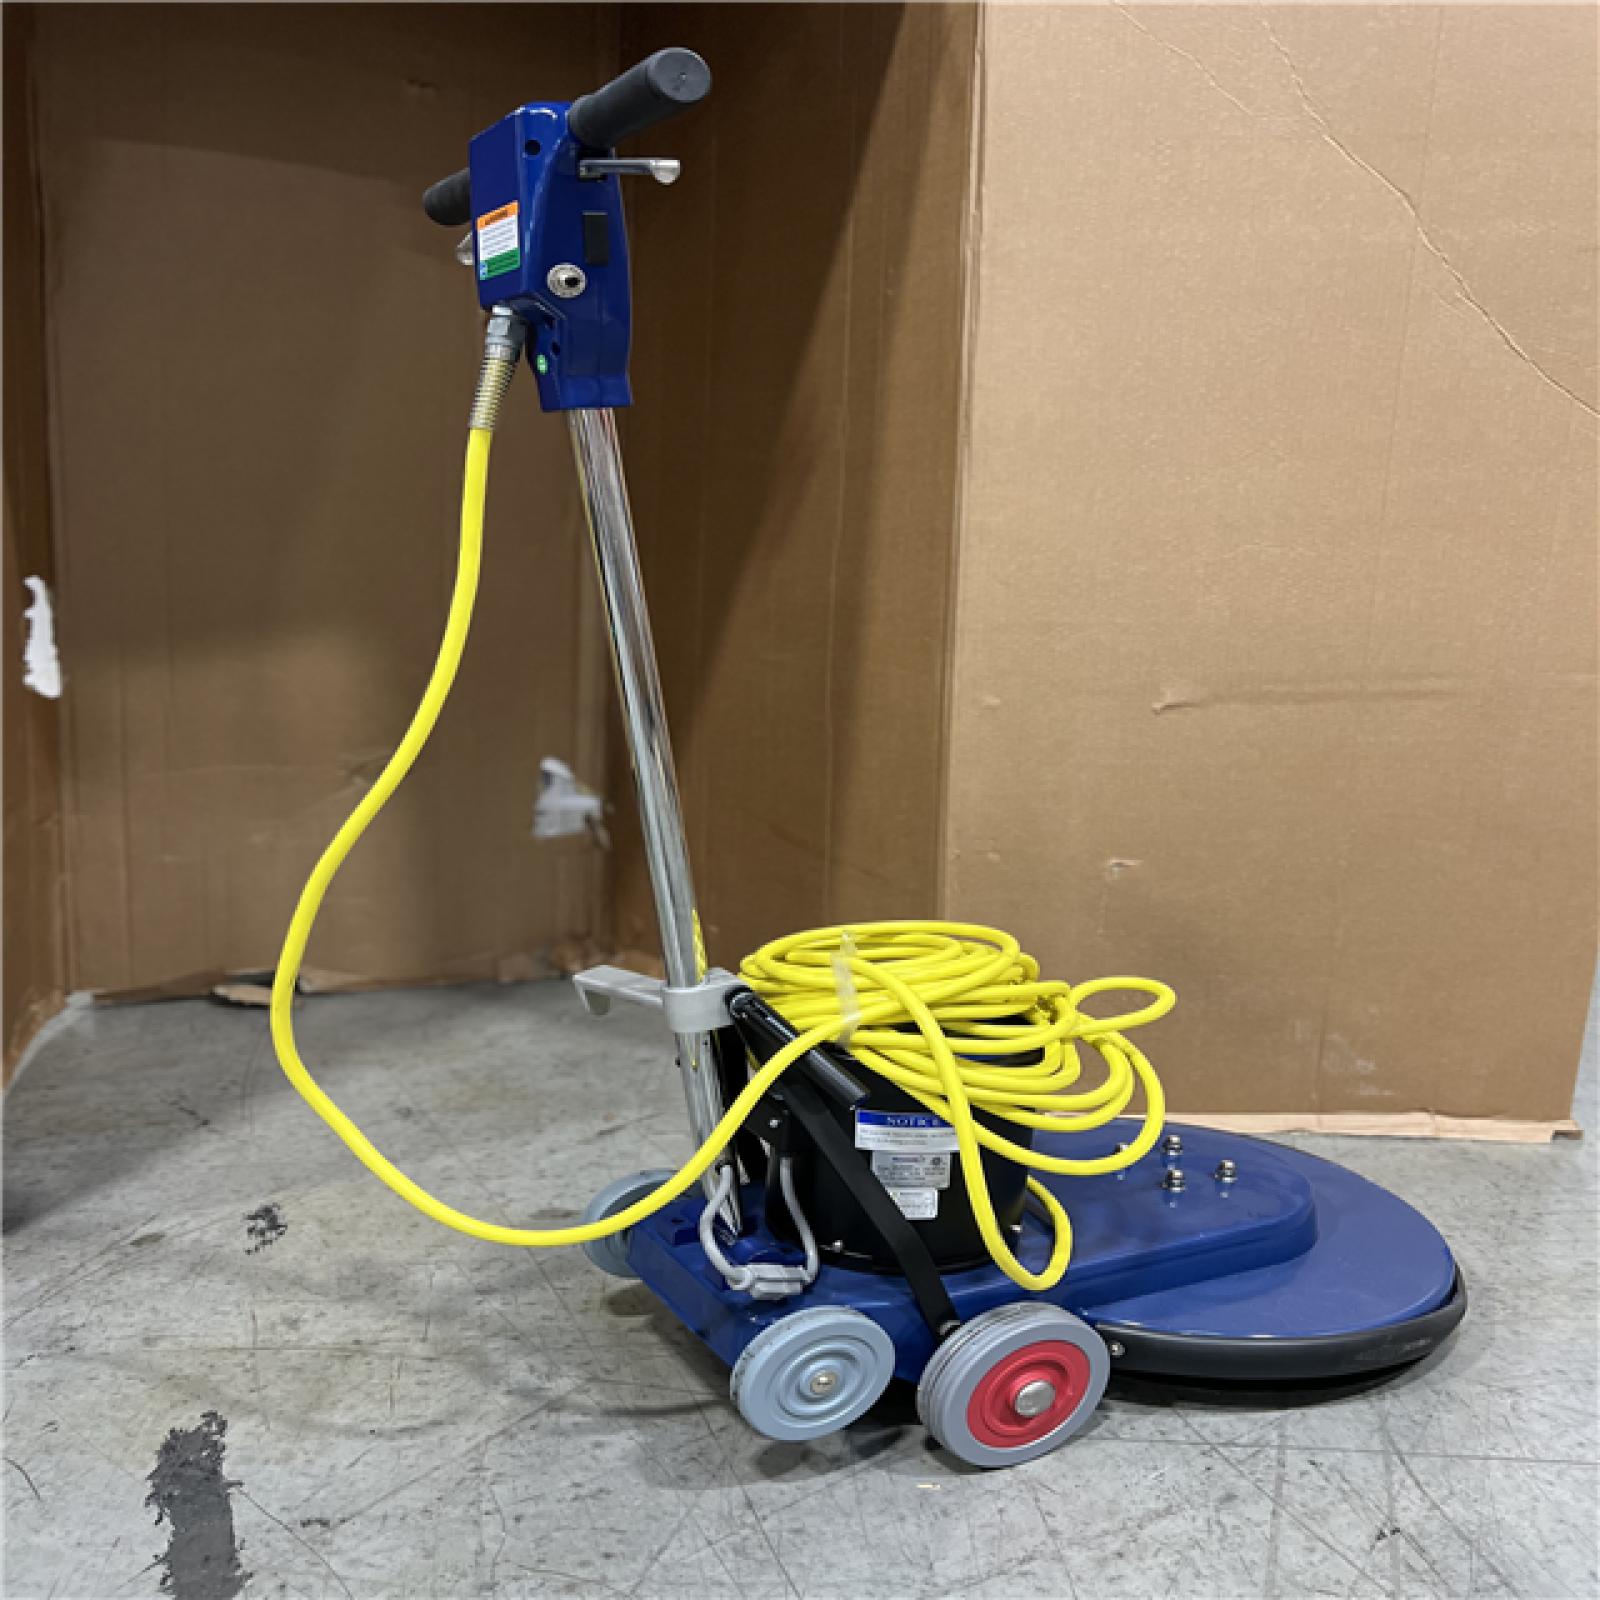 DALLAS LOCATION - Renown 20 in. High-Speed Electric Floor Polisher Commercial Grade, 1500RPM